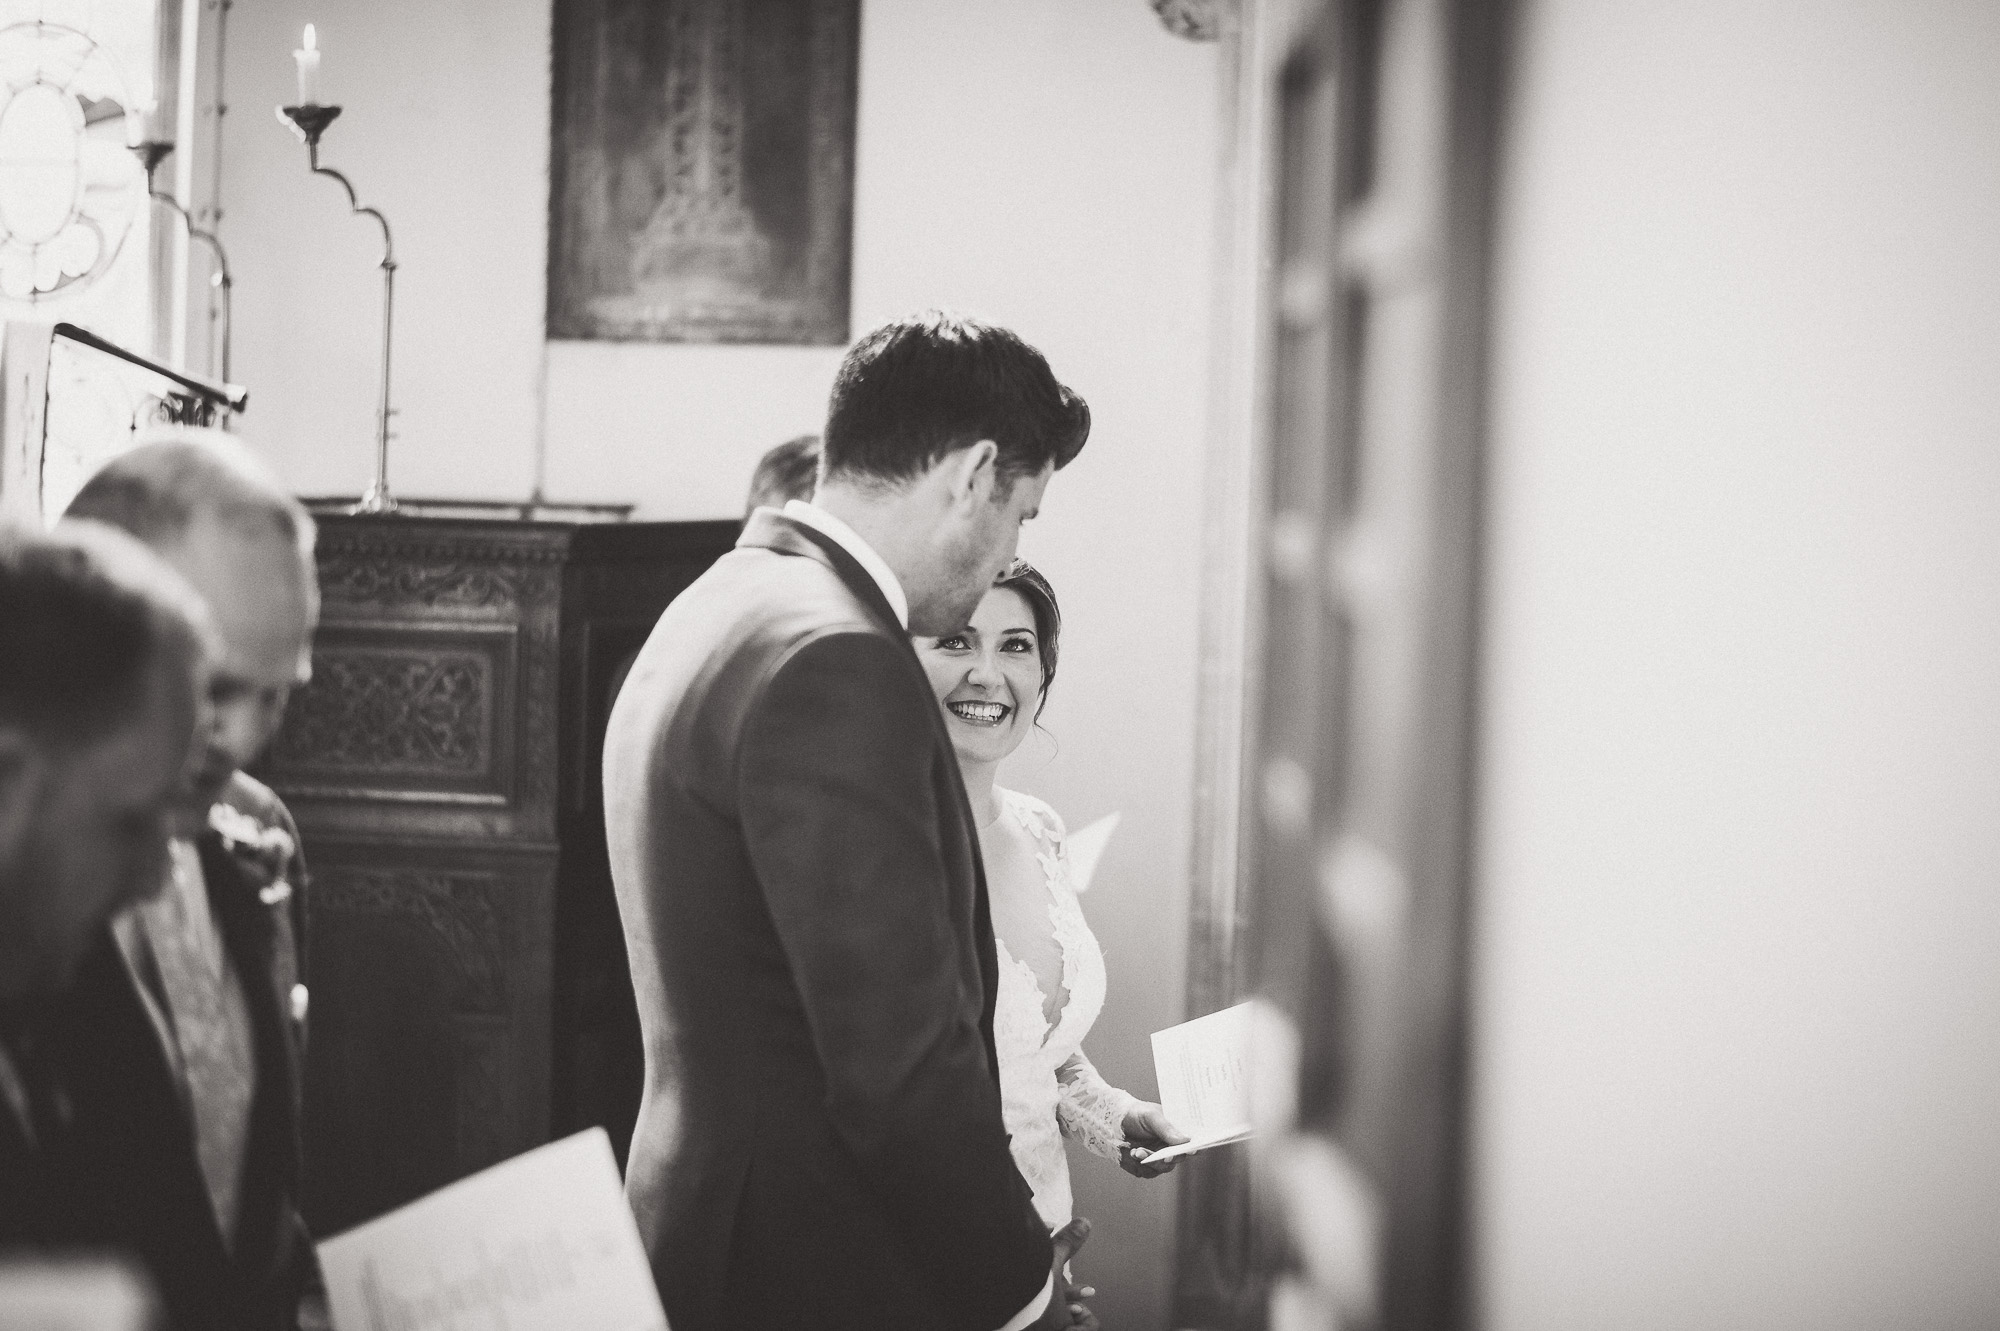 A wedding photographer captures an intimate exchange between the bride and groom during their wedding ceremony.